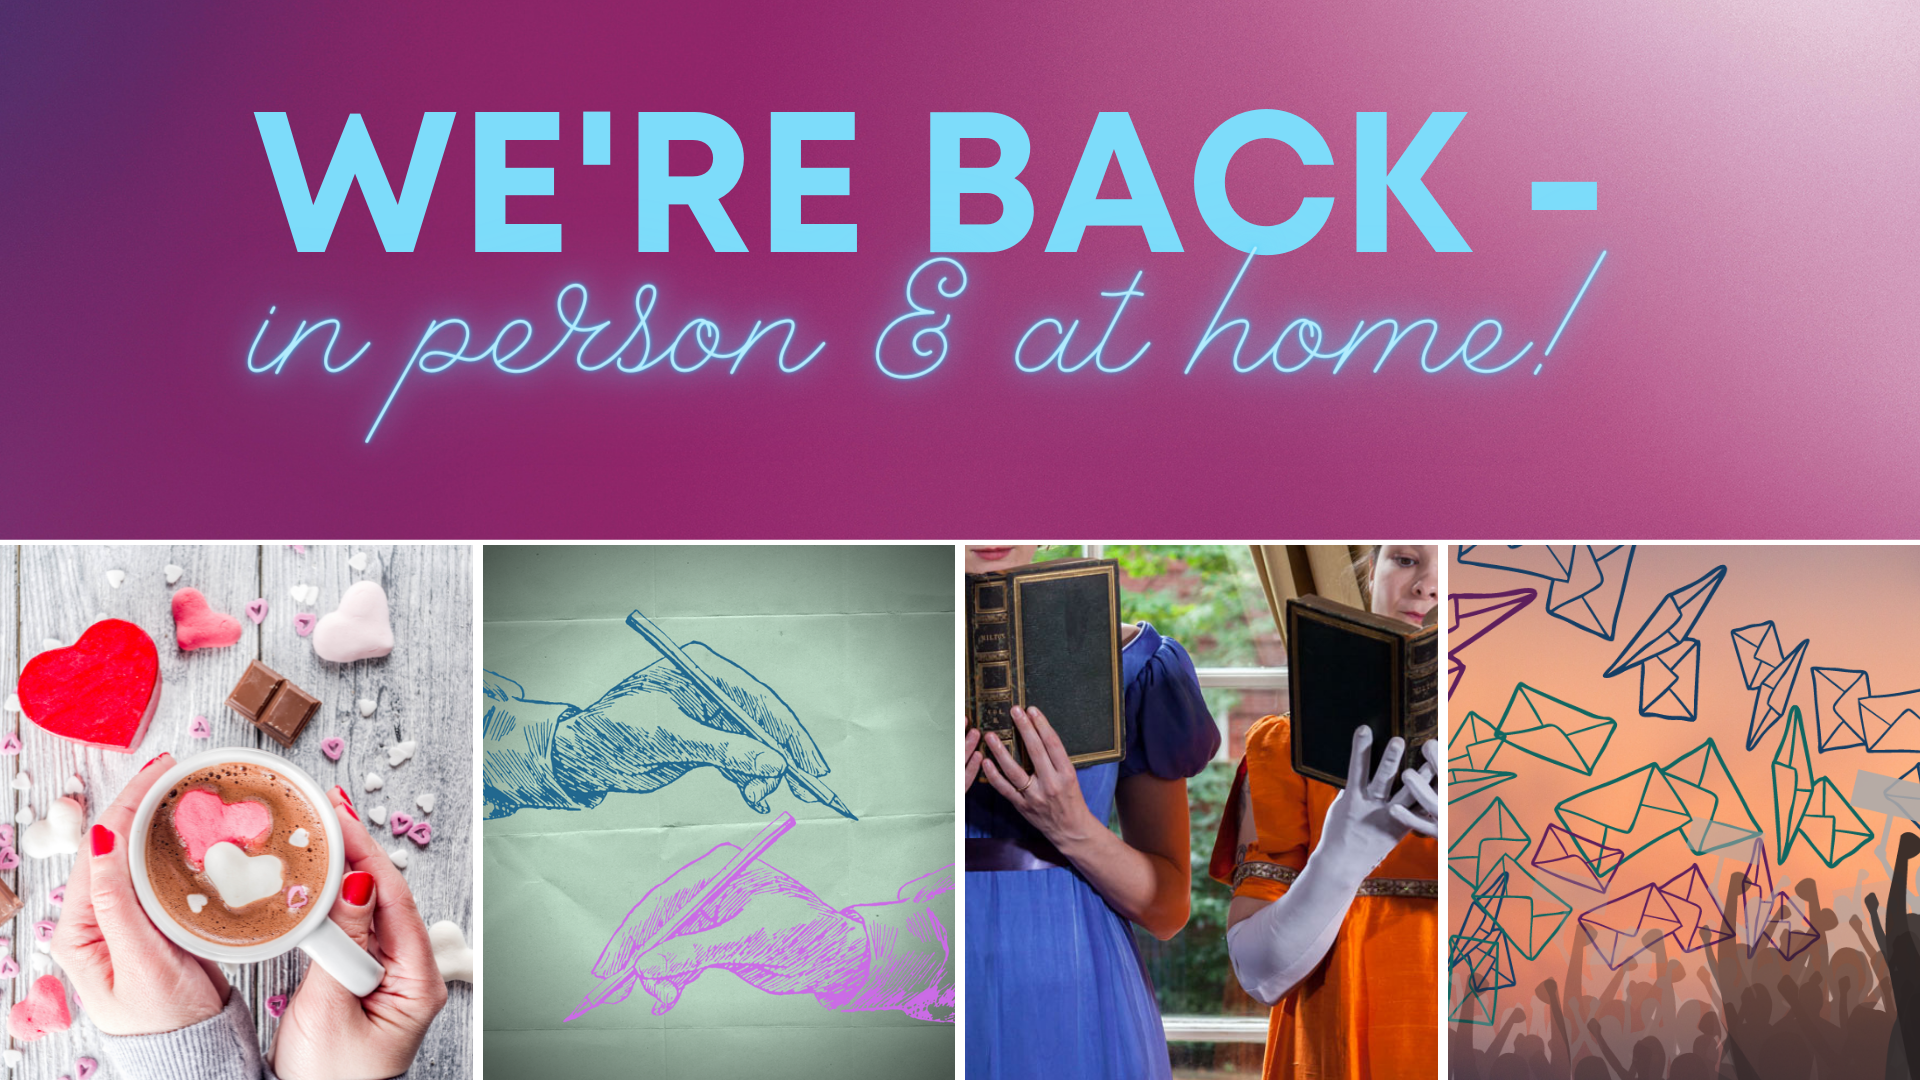 The text "We're back - in person & at home" on a purple background. On the bottom are four decorative images of the show art for the season.